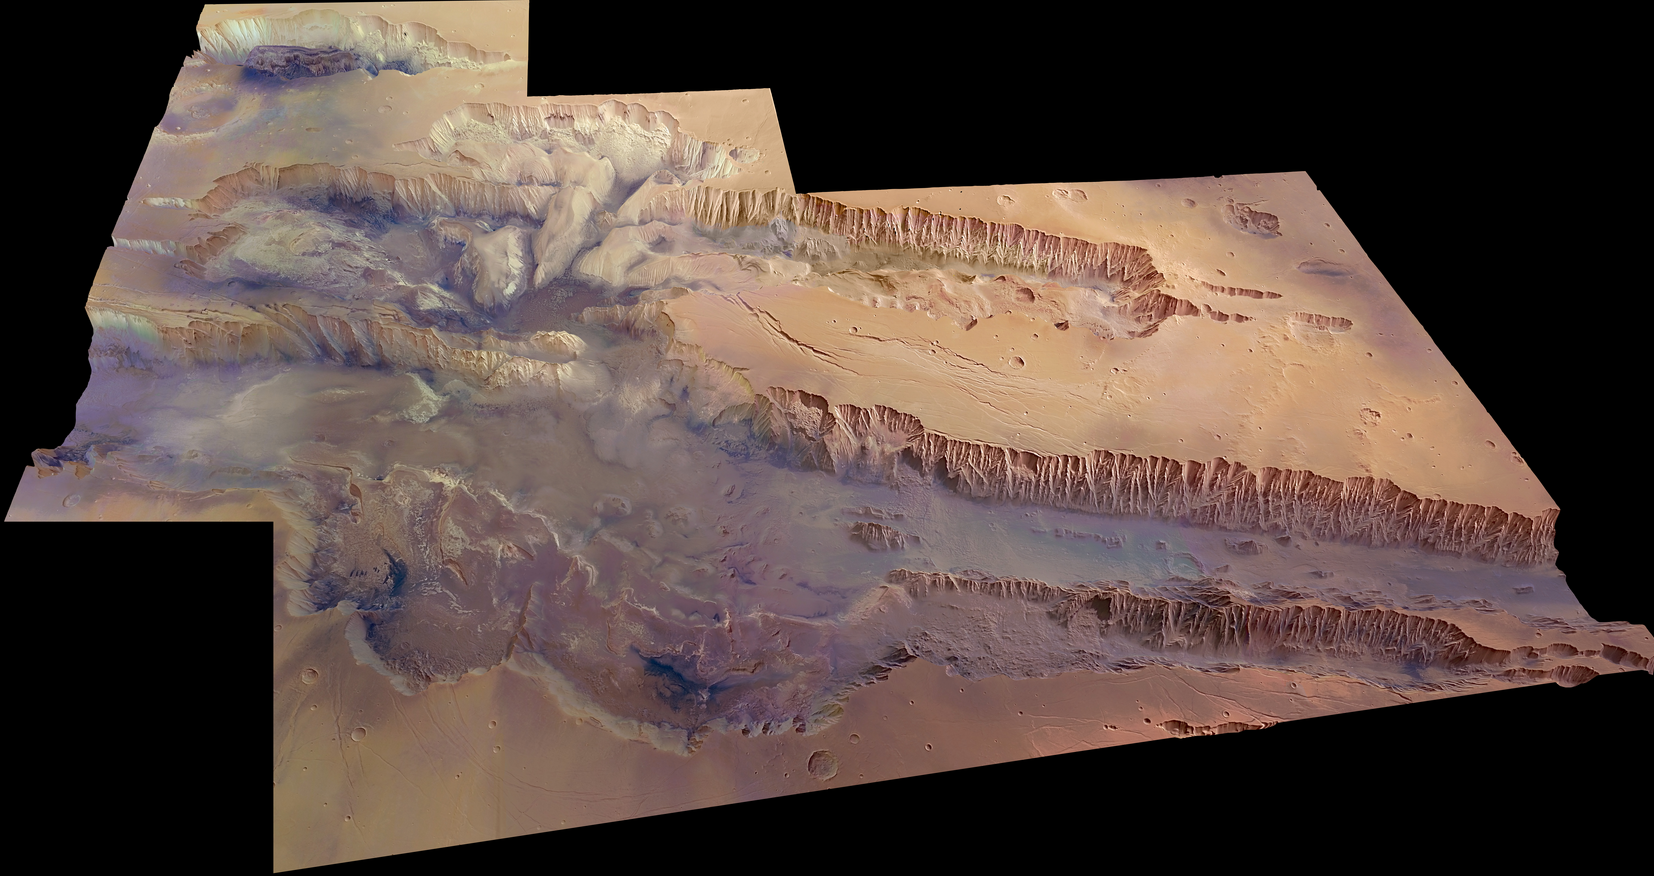 http://www.exoplanety.cz/wp-content/uploads/2012/10/valles_marineris.png